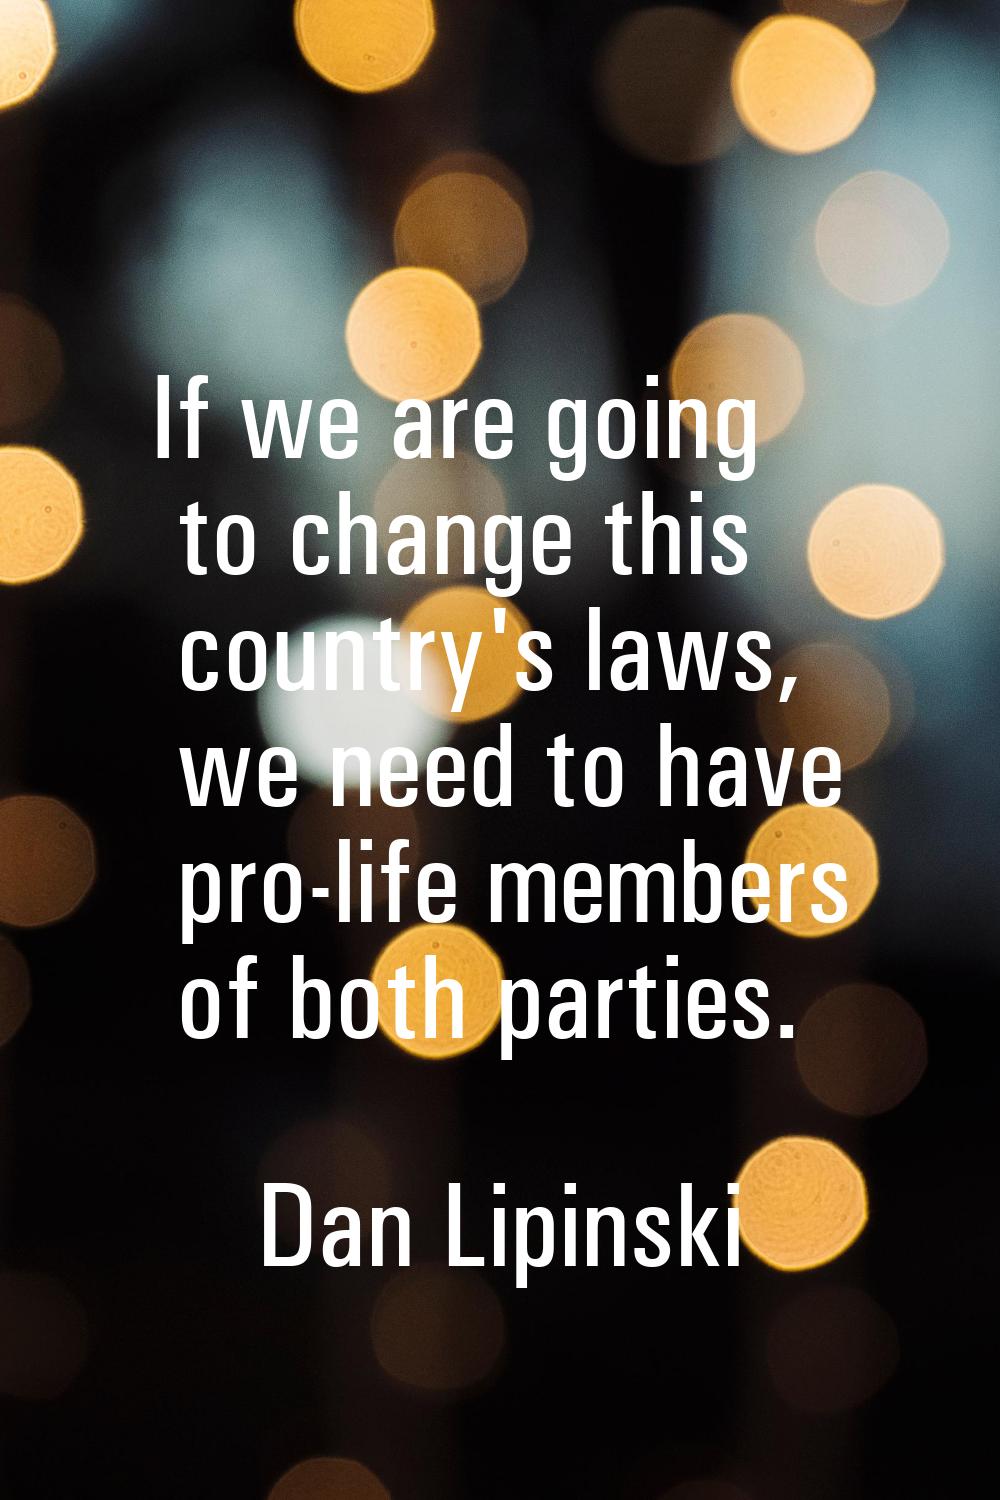 If we are going to change this country's laws, we need to have pro-life members of both parties.